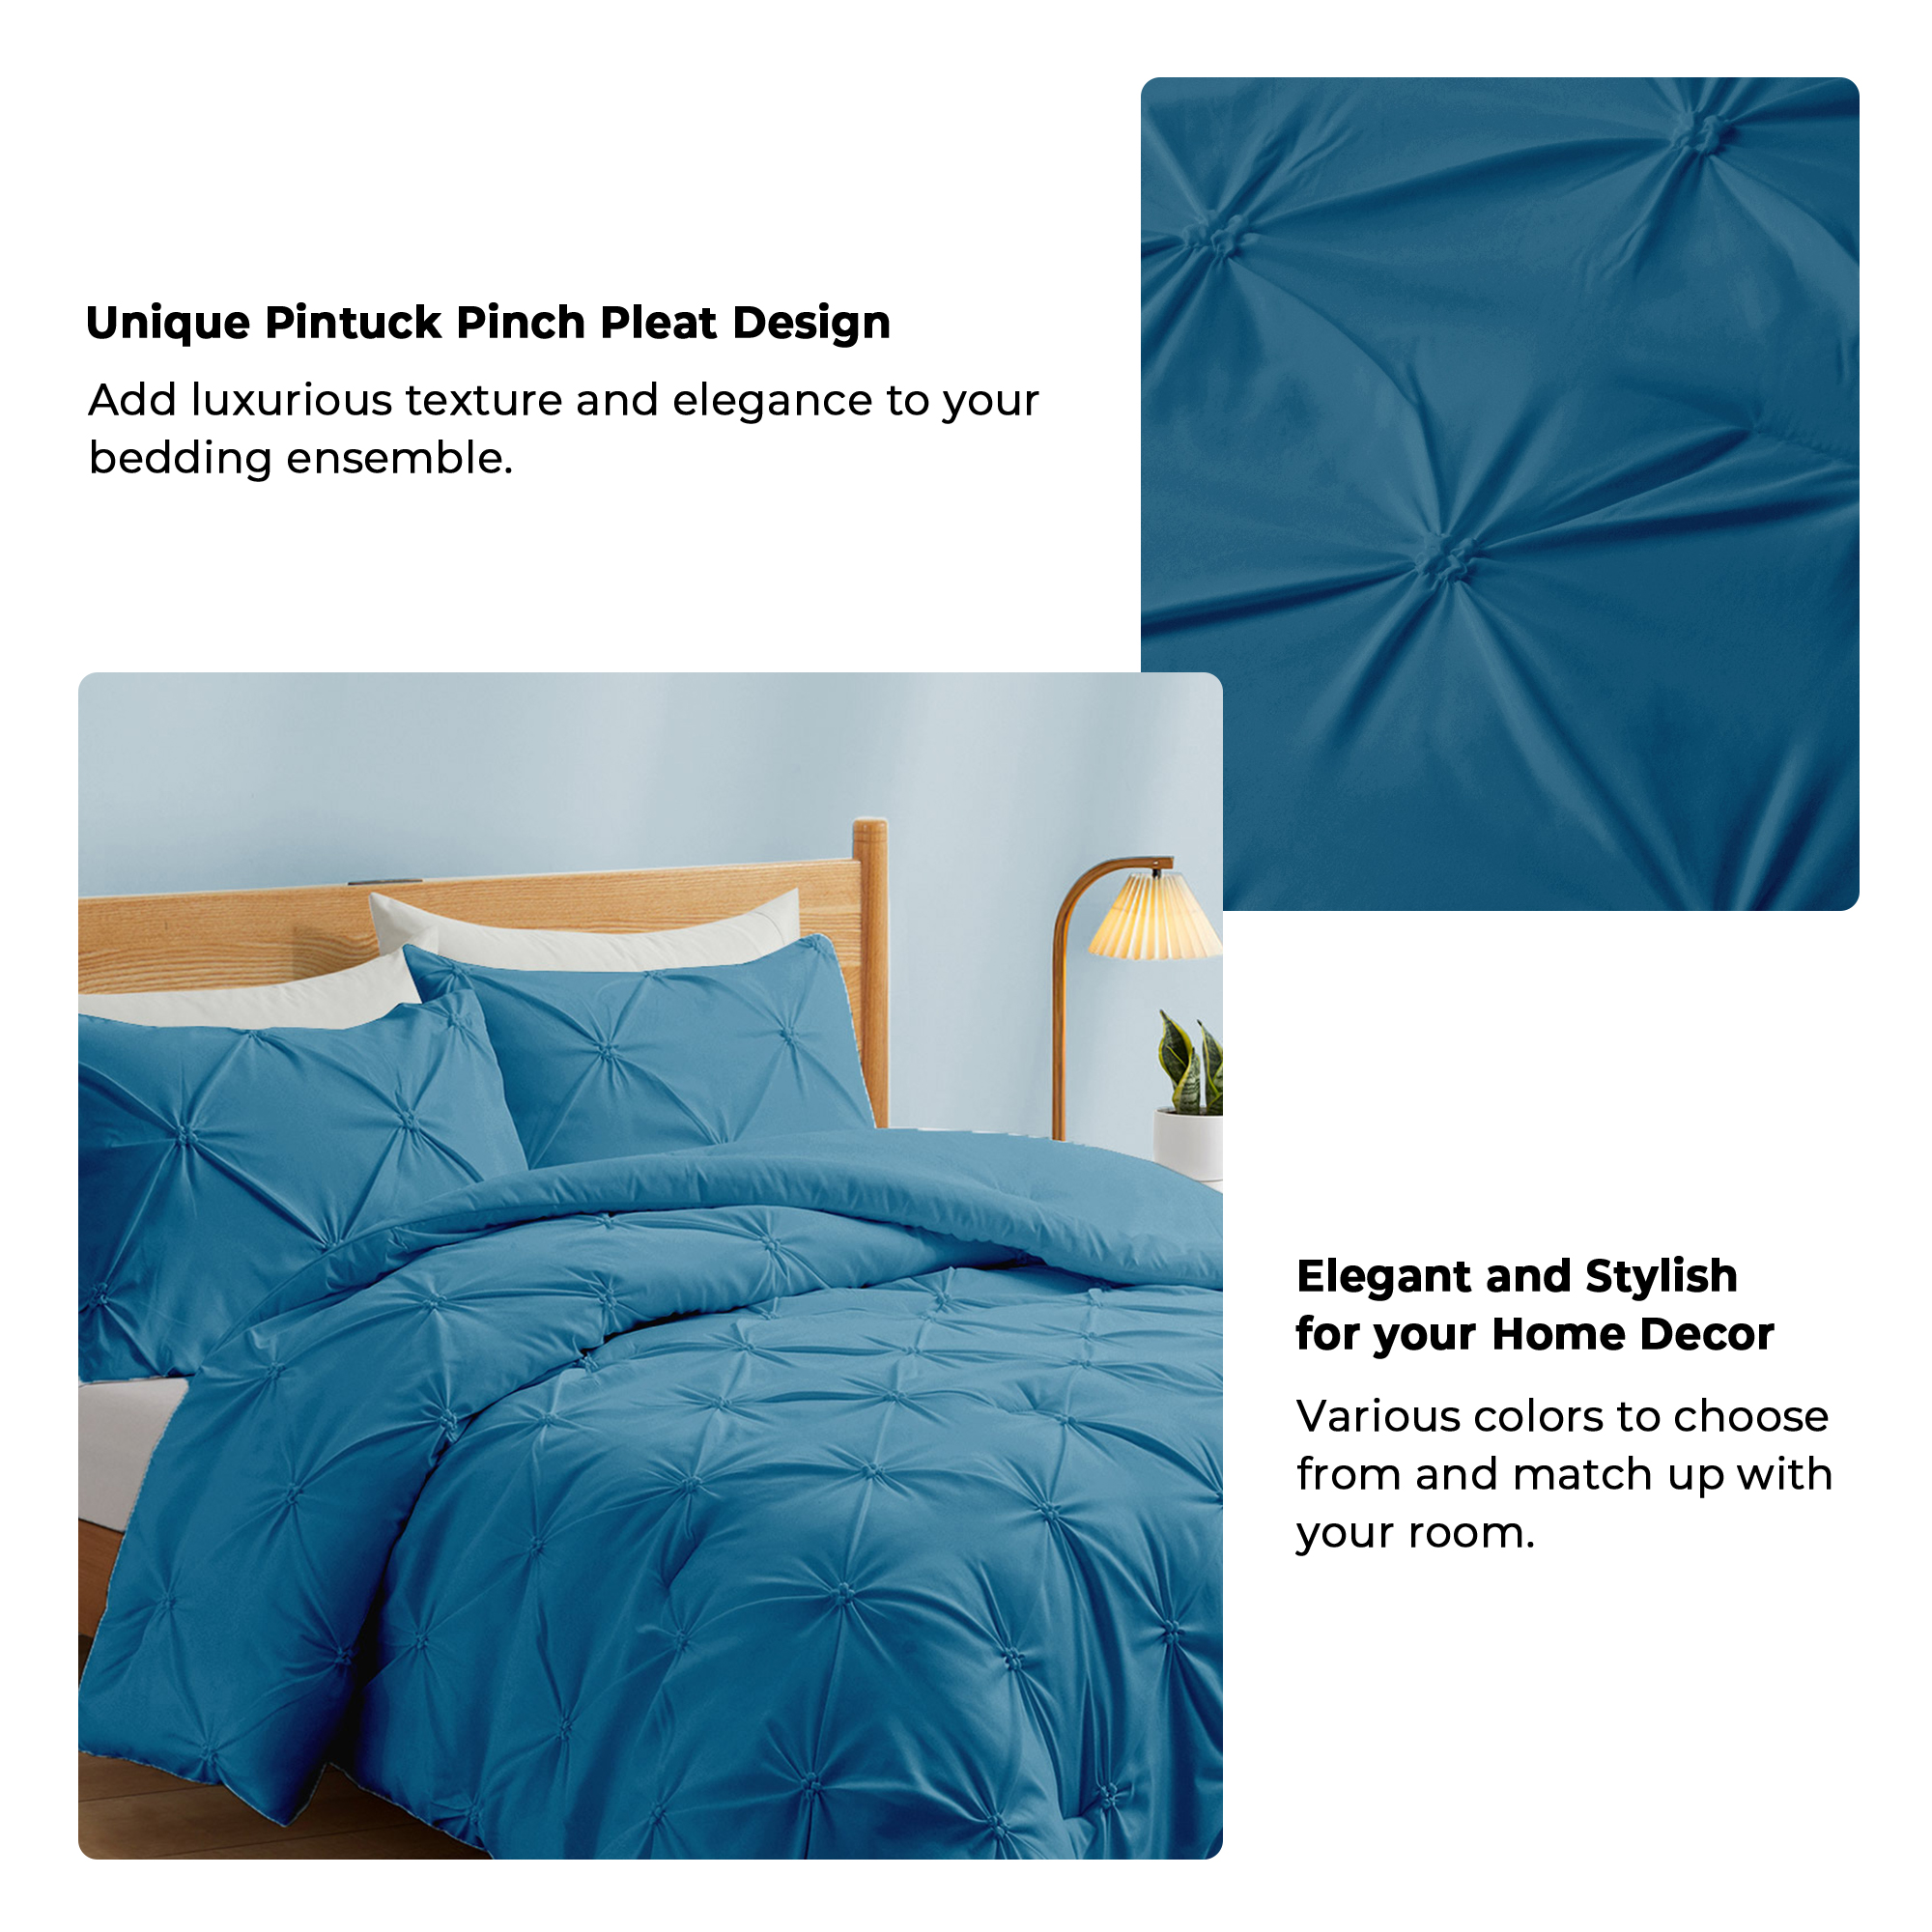 Peace Nest 3-Piece All Season Pinch Pleated Comforter Set, Navy, Twin - image 4 of 6